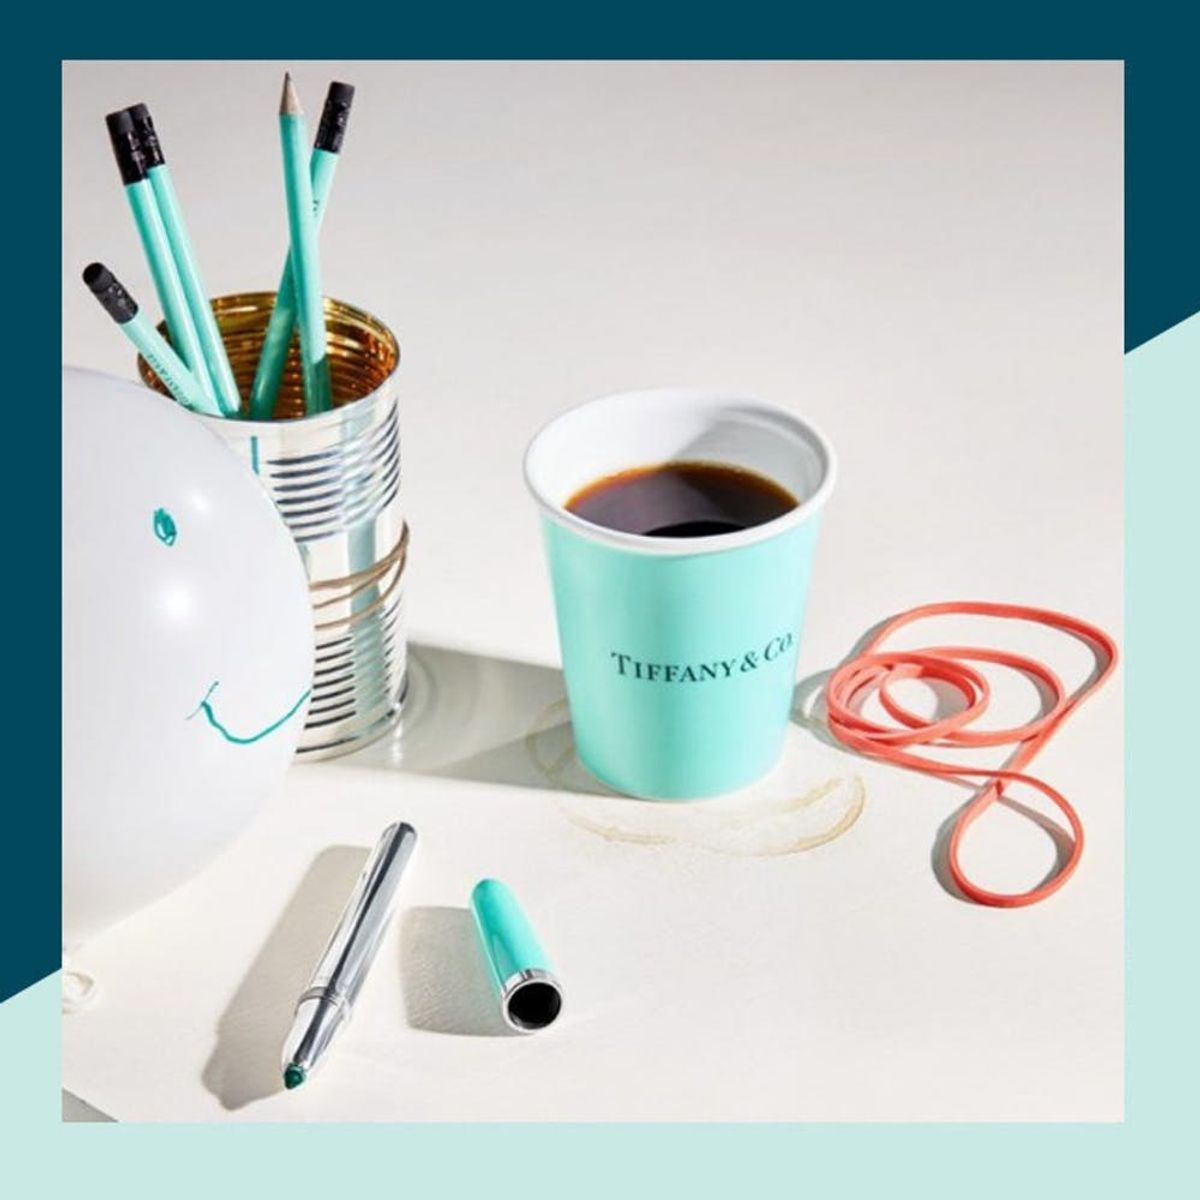 Tiffany & Co.’s Everyday Objects Line Features a $250 Bendy Straw